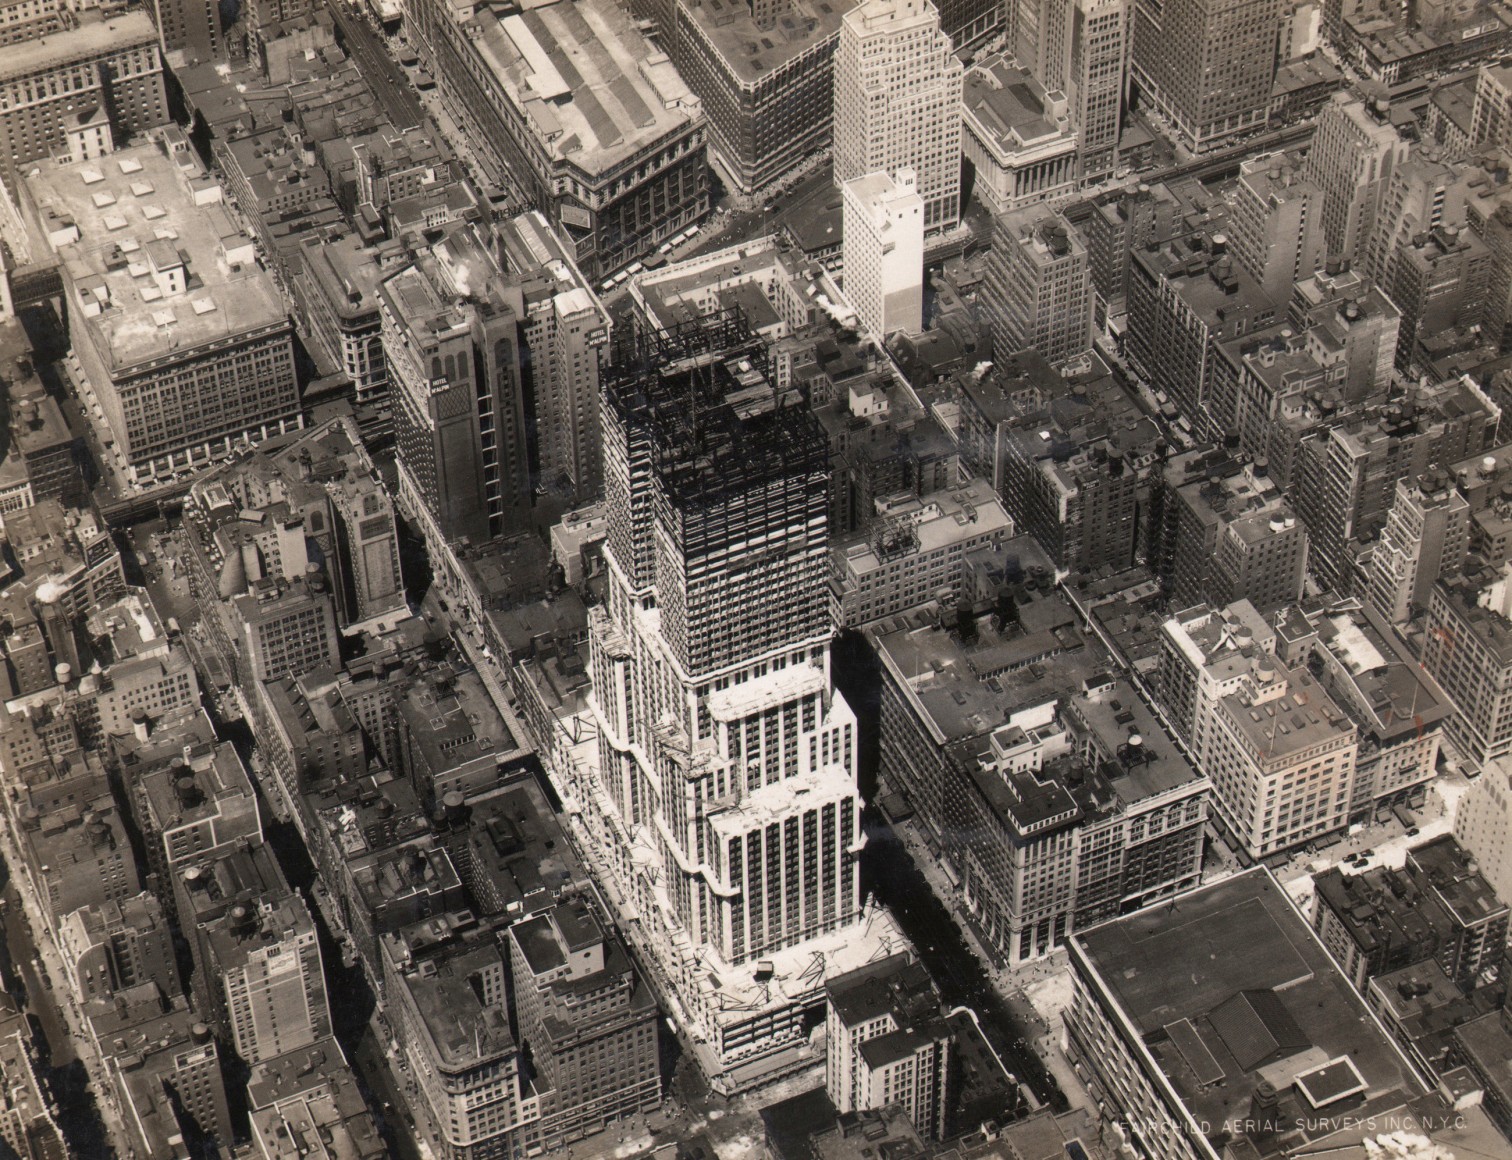 22. Fairchild Aerial Surveys, Empire State Building Construction, West 34th Street, New York City, ​1930. Aerial view of the in-progress Empire State Building, built up to about half its total height.